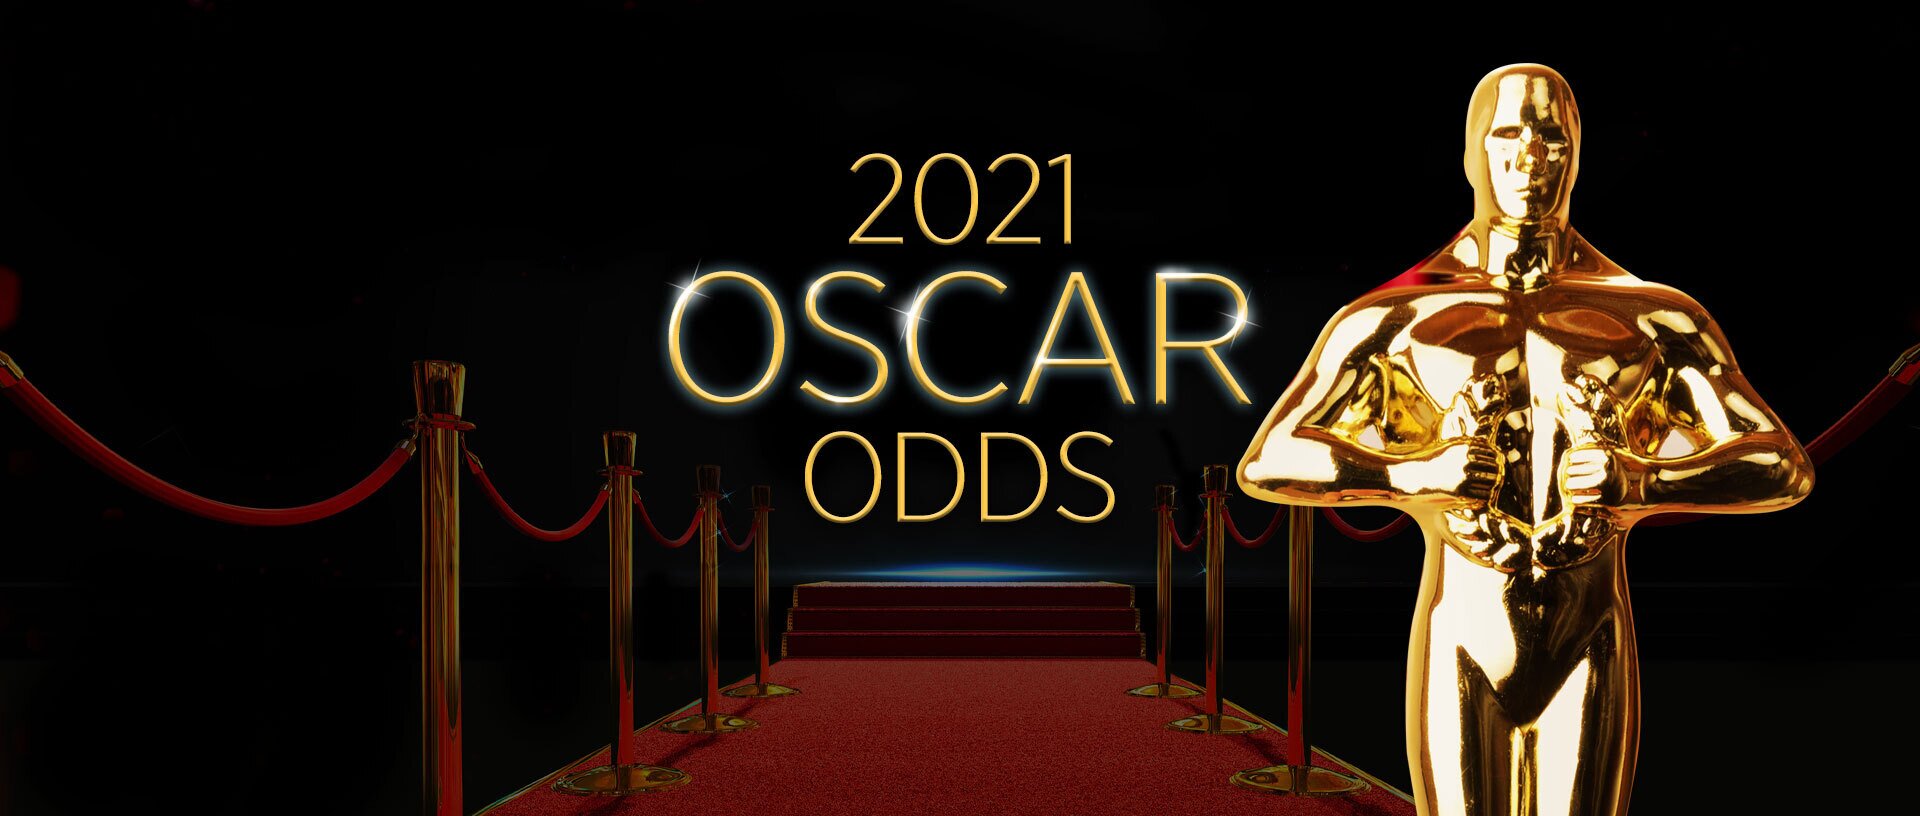 where to place oscar bets